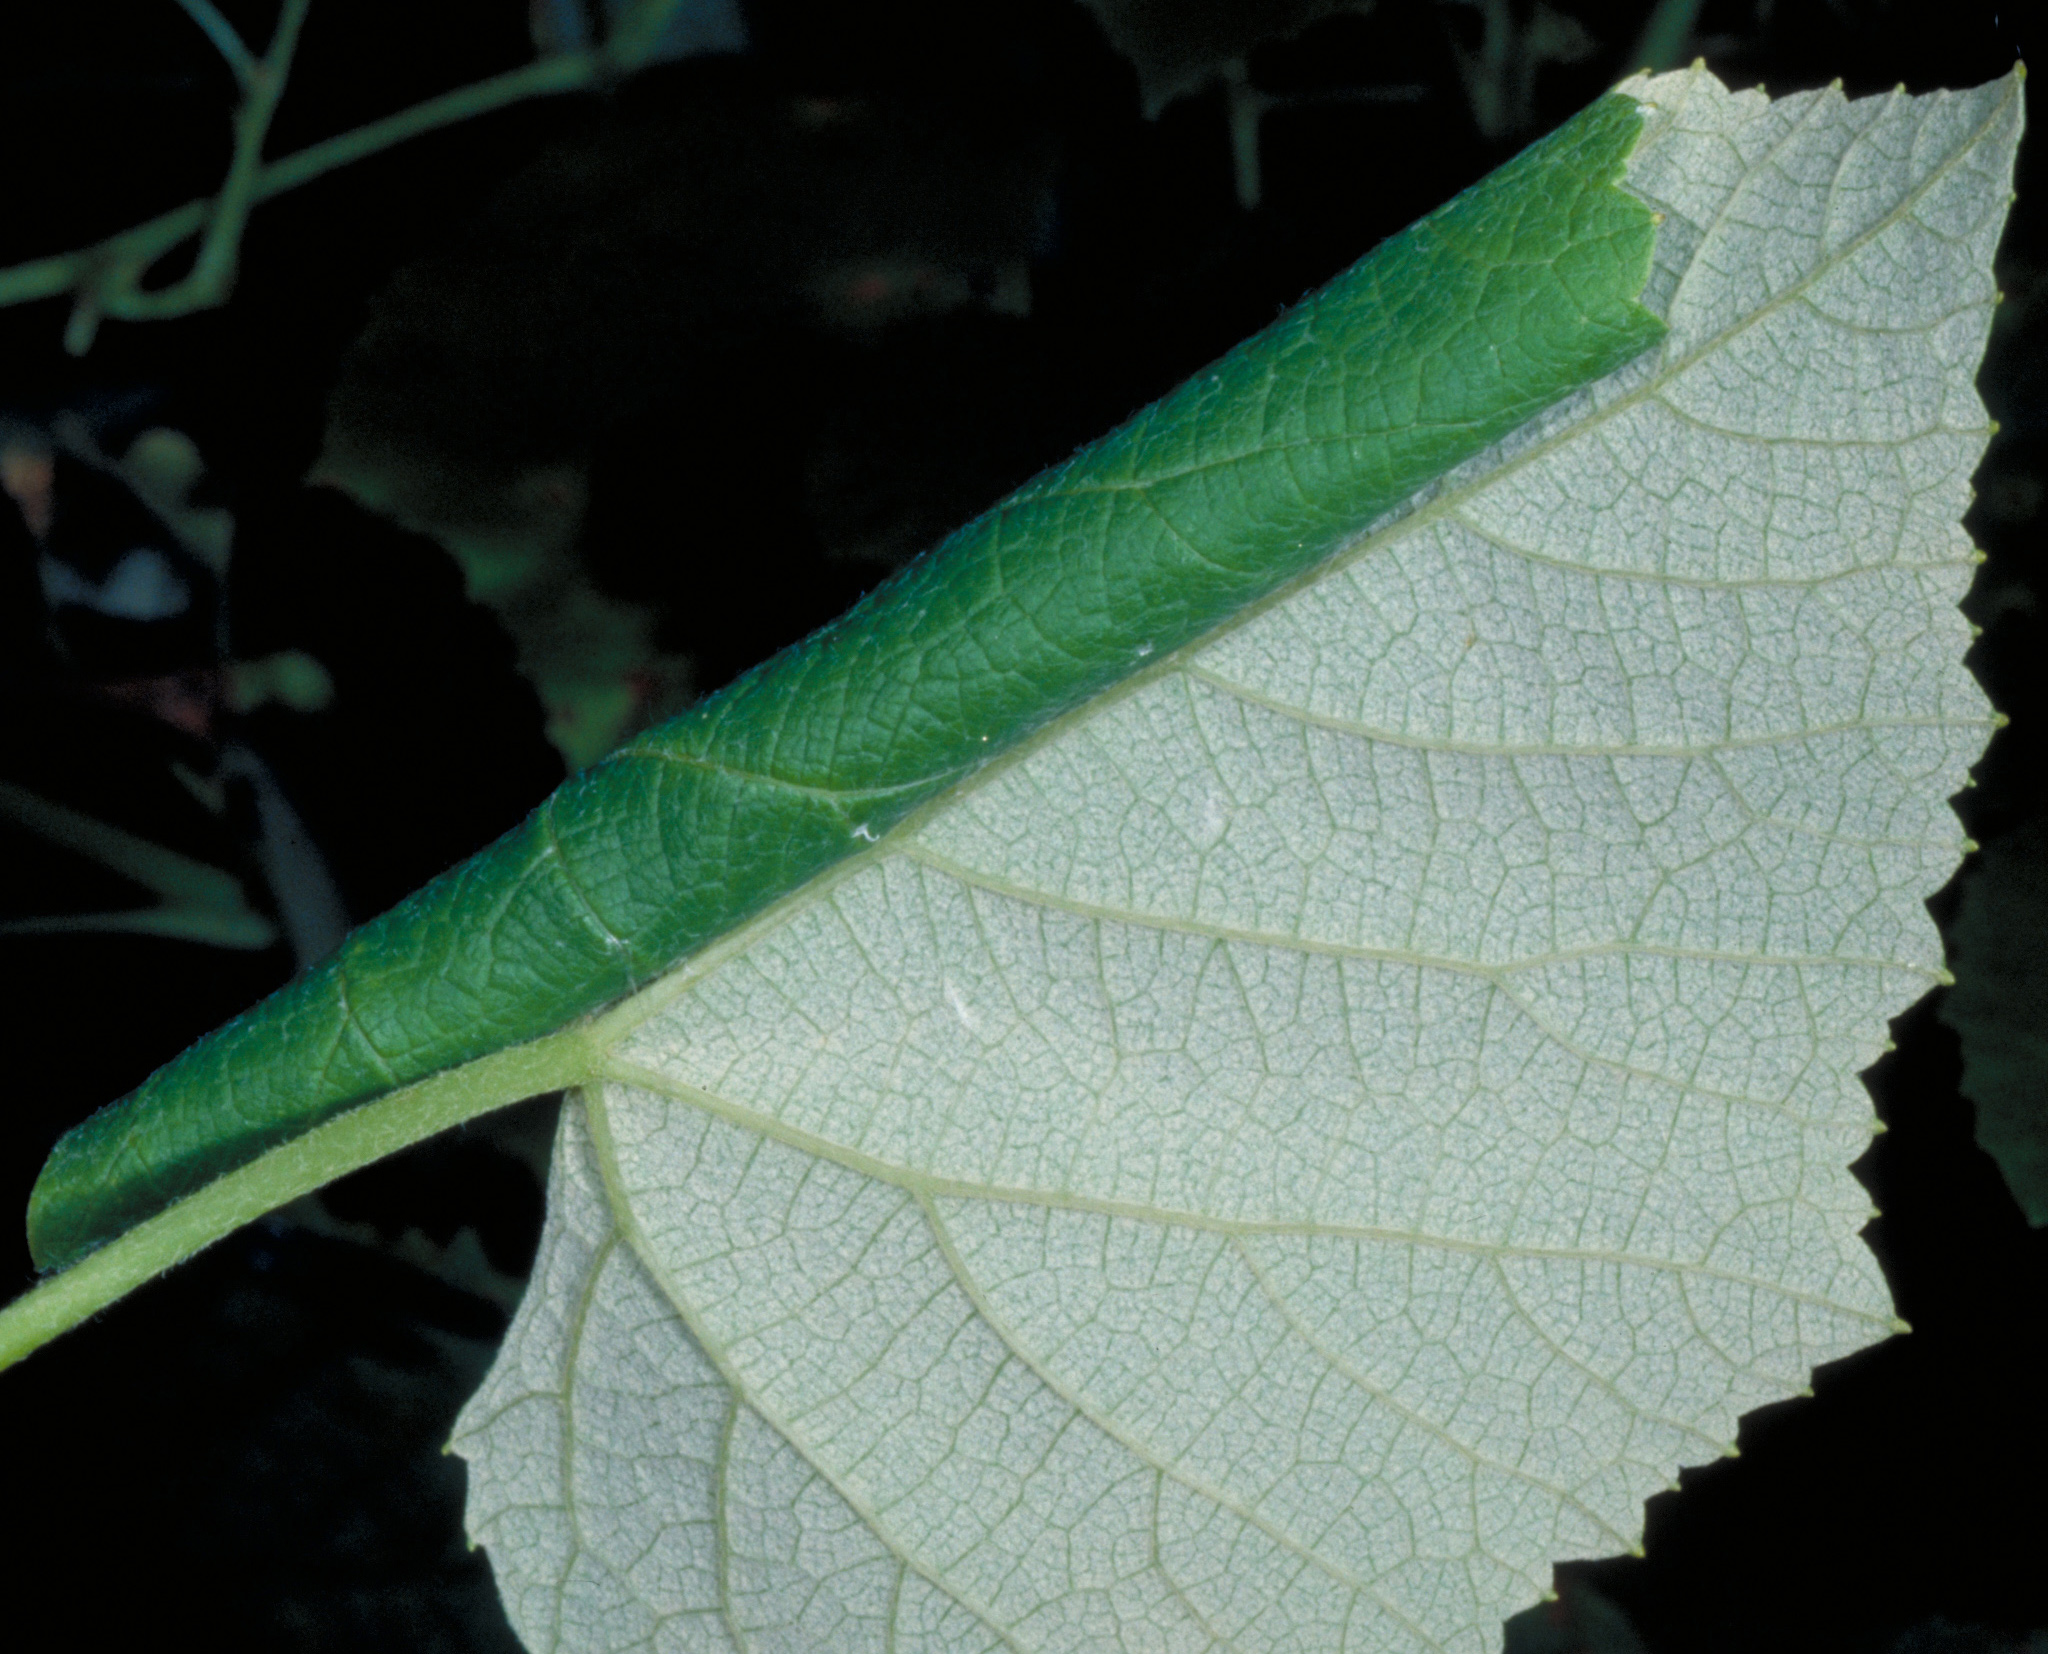 Leaf rolled with silk by leafroller larvae. 